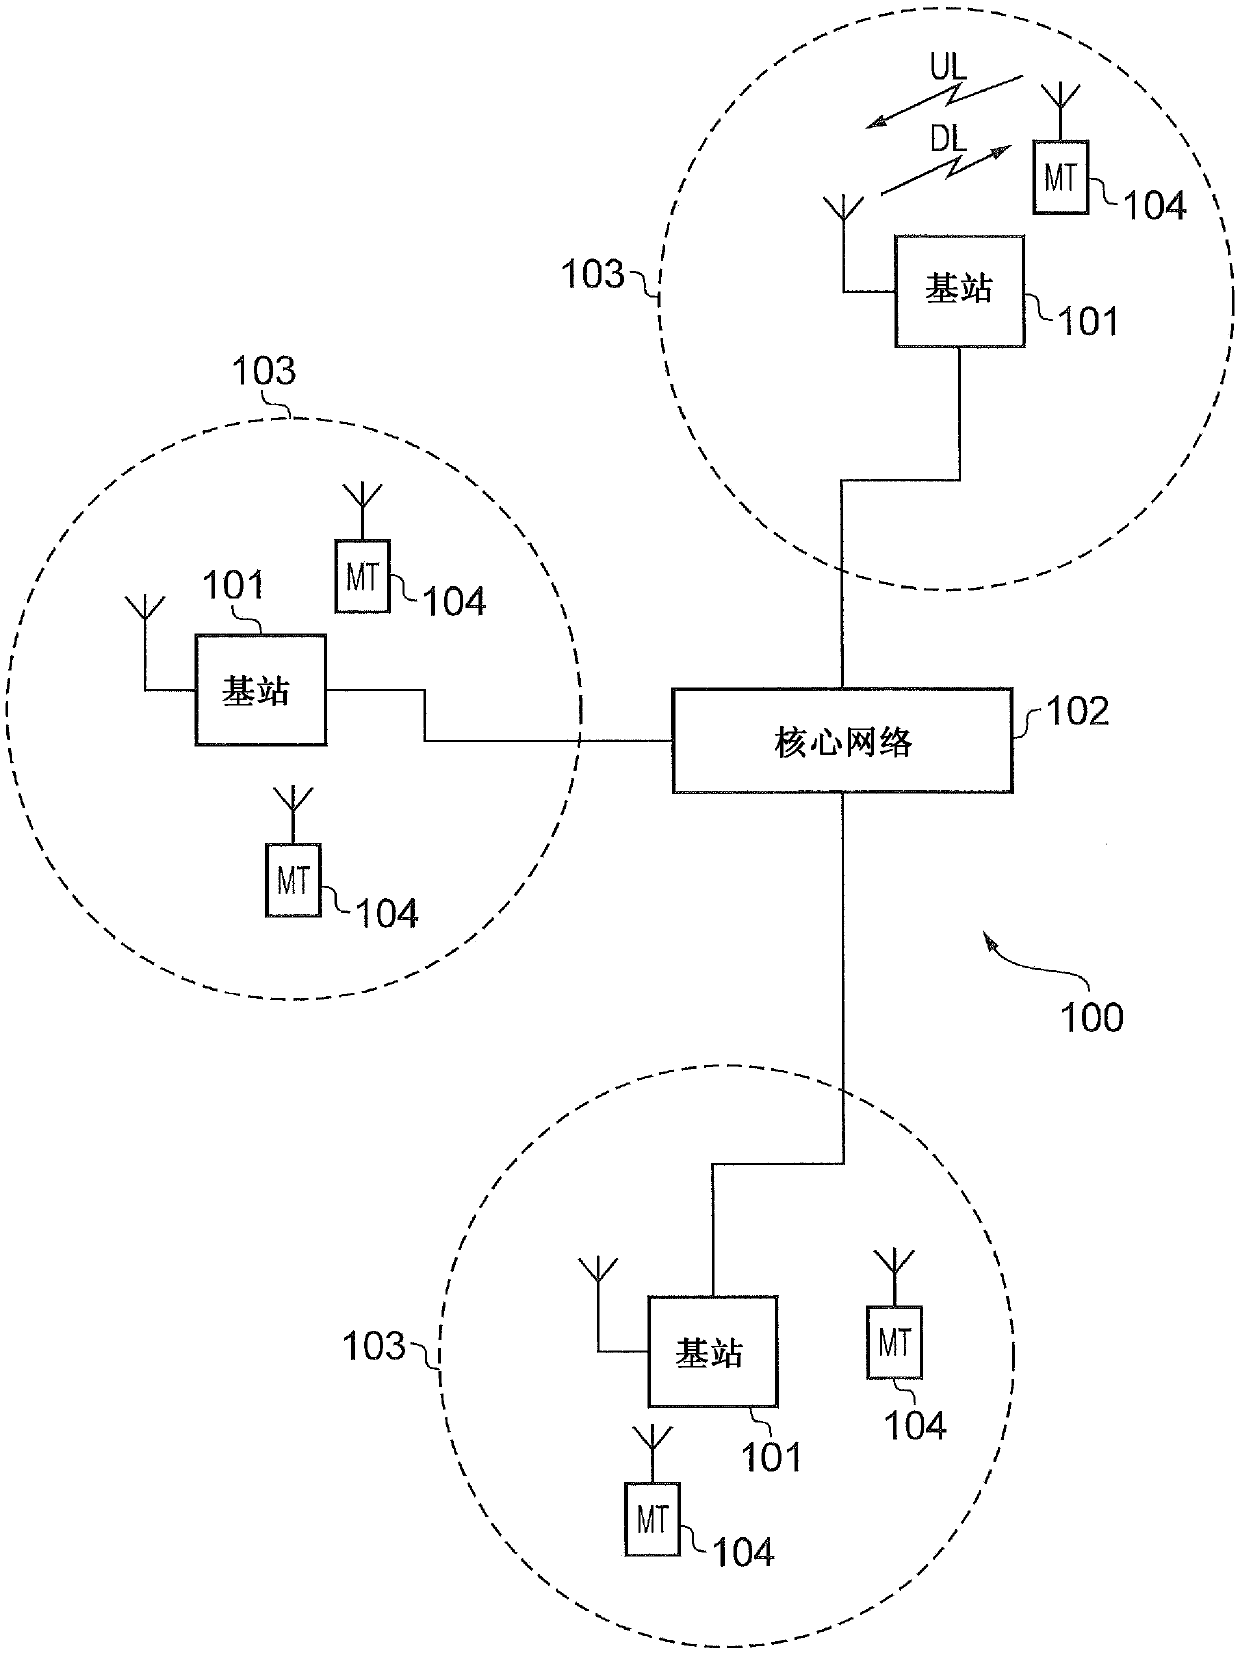 Communications devices and methods